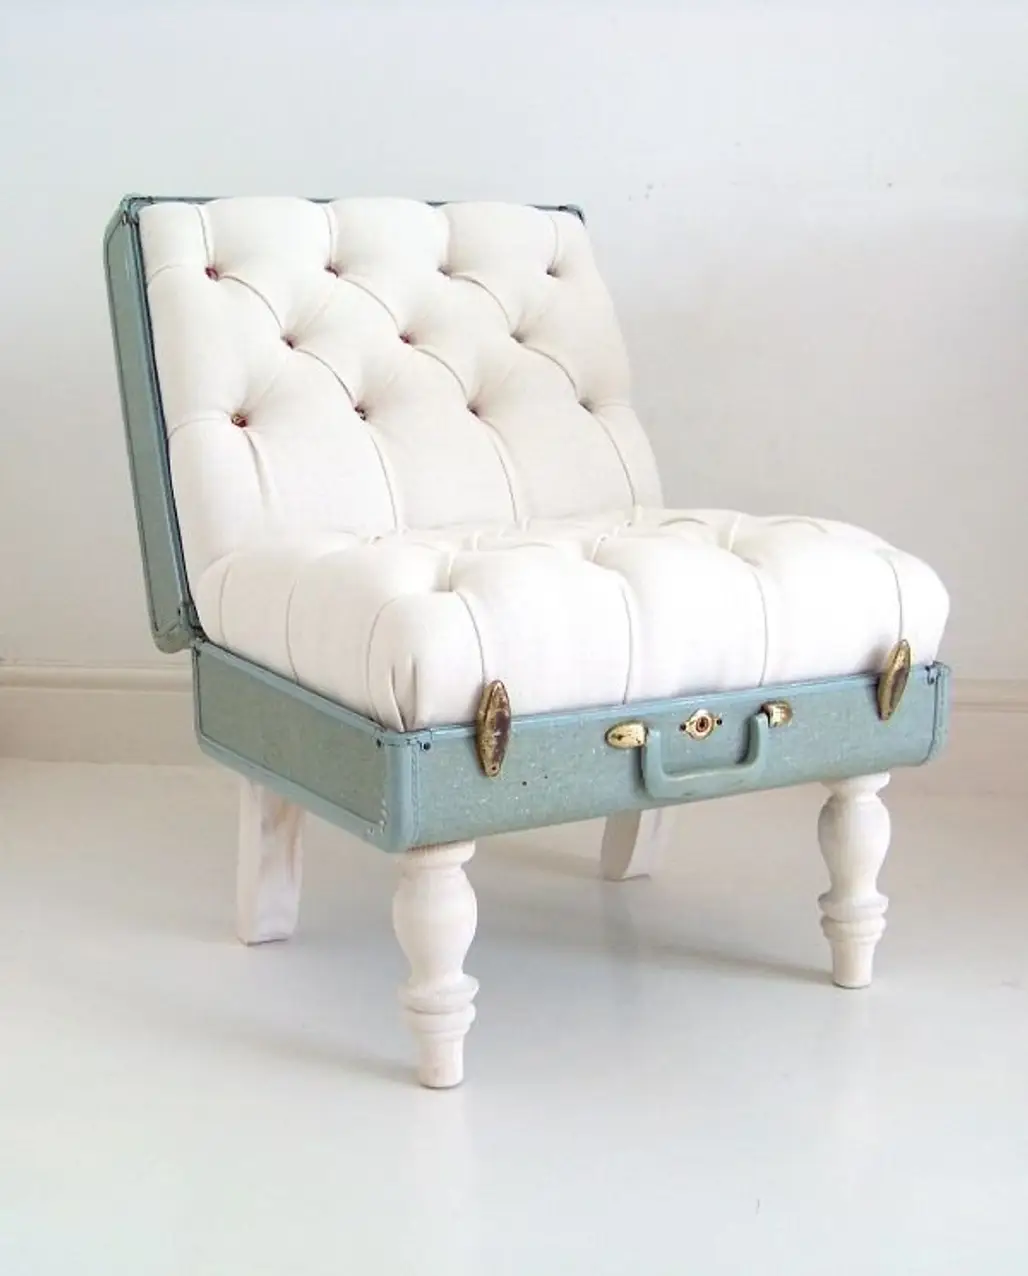 The Suitcase Chair